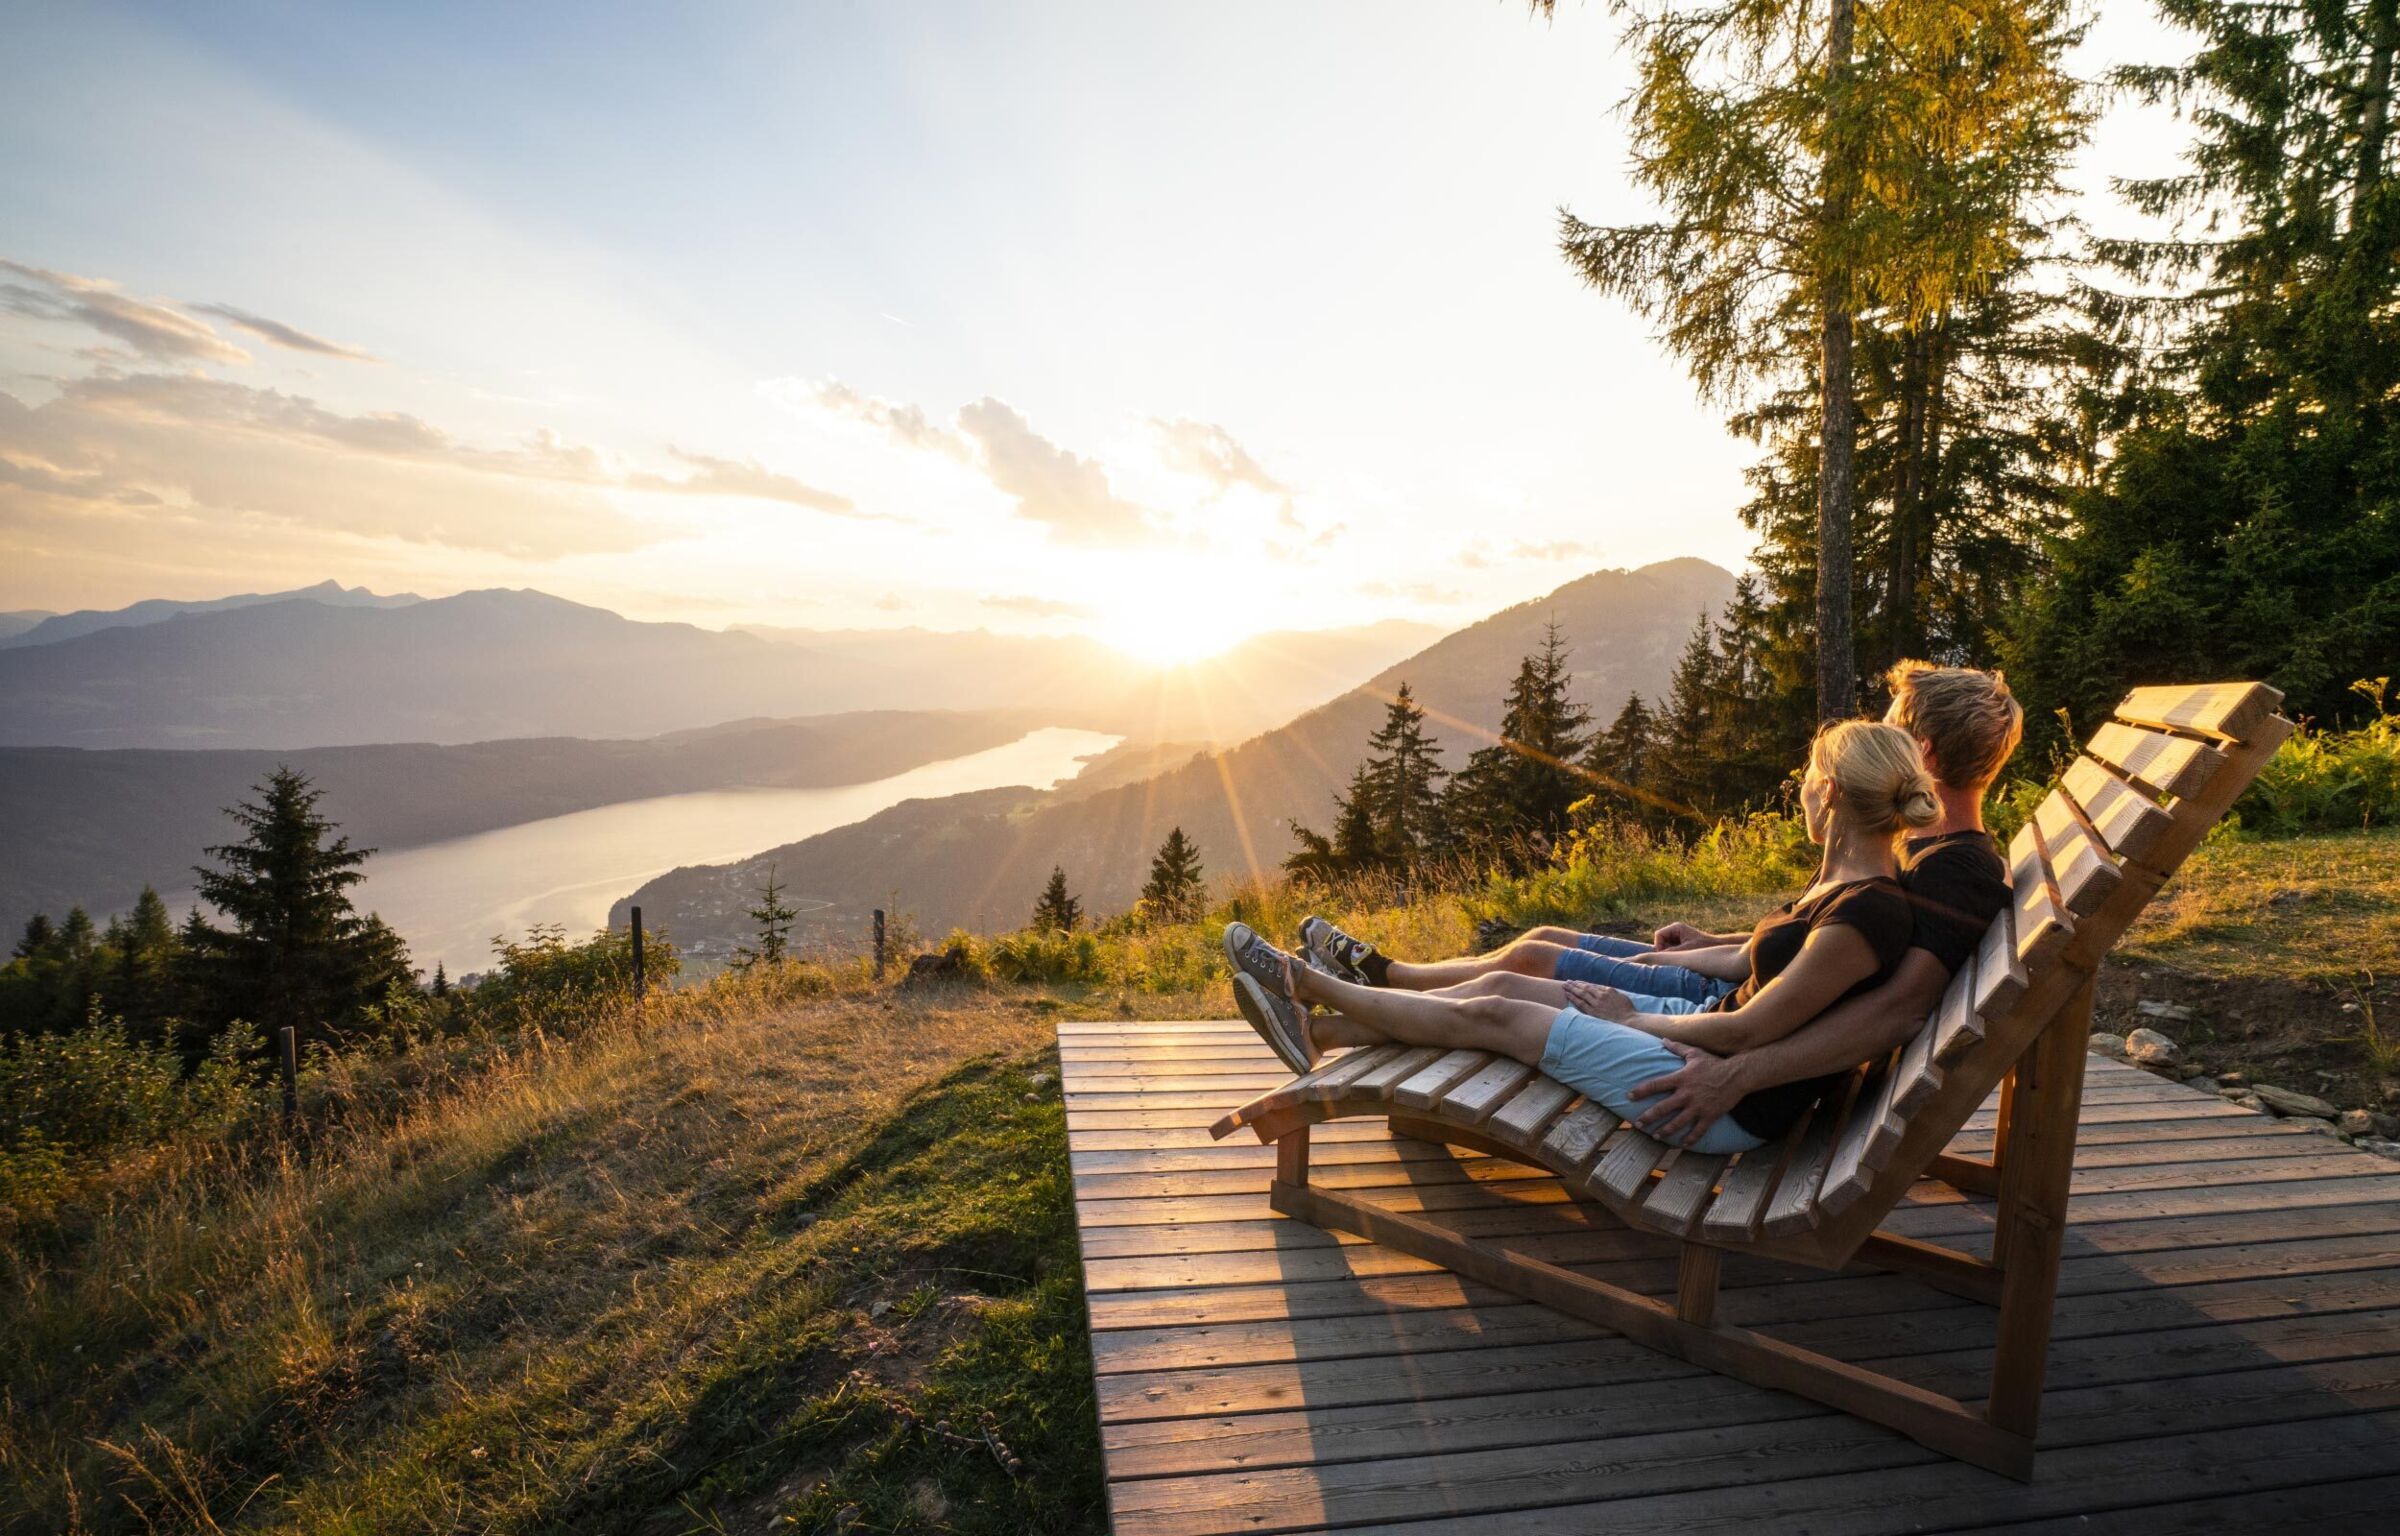 A couple sits on a wooden bench and enjoys the sunrise in the mountains.